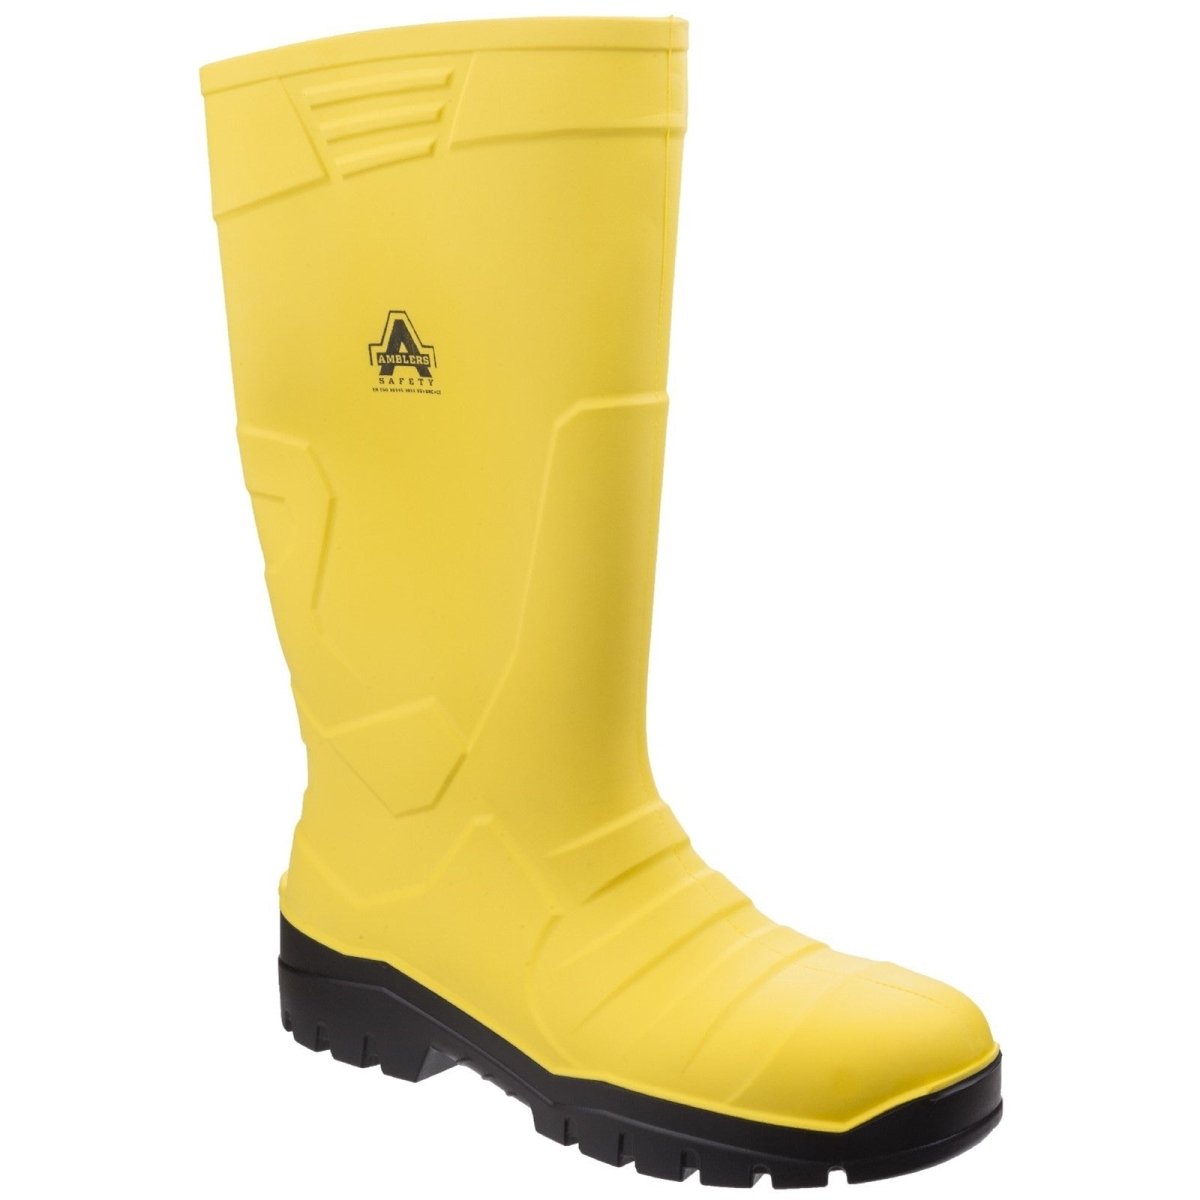 Amblers Safety AS1007 Full Safety Wellington - Shoe Store Direct